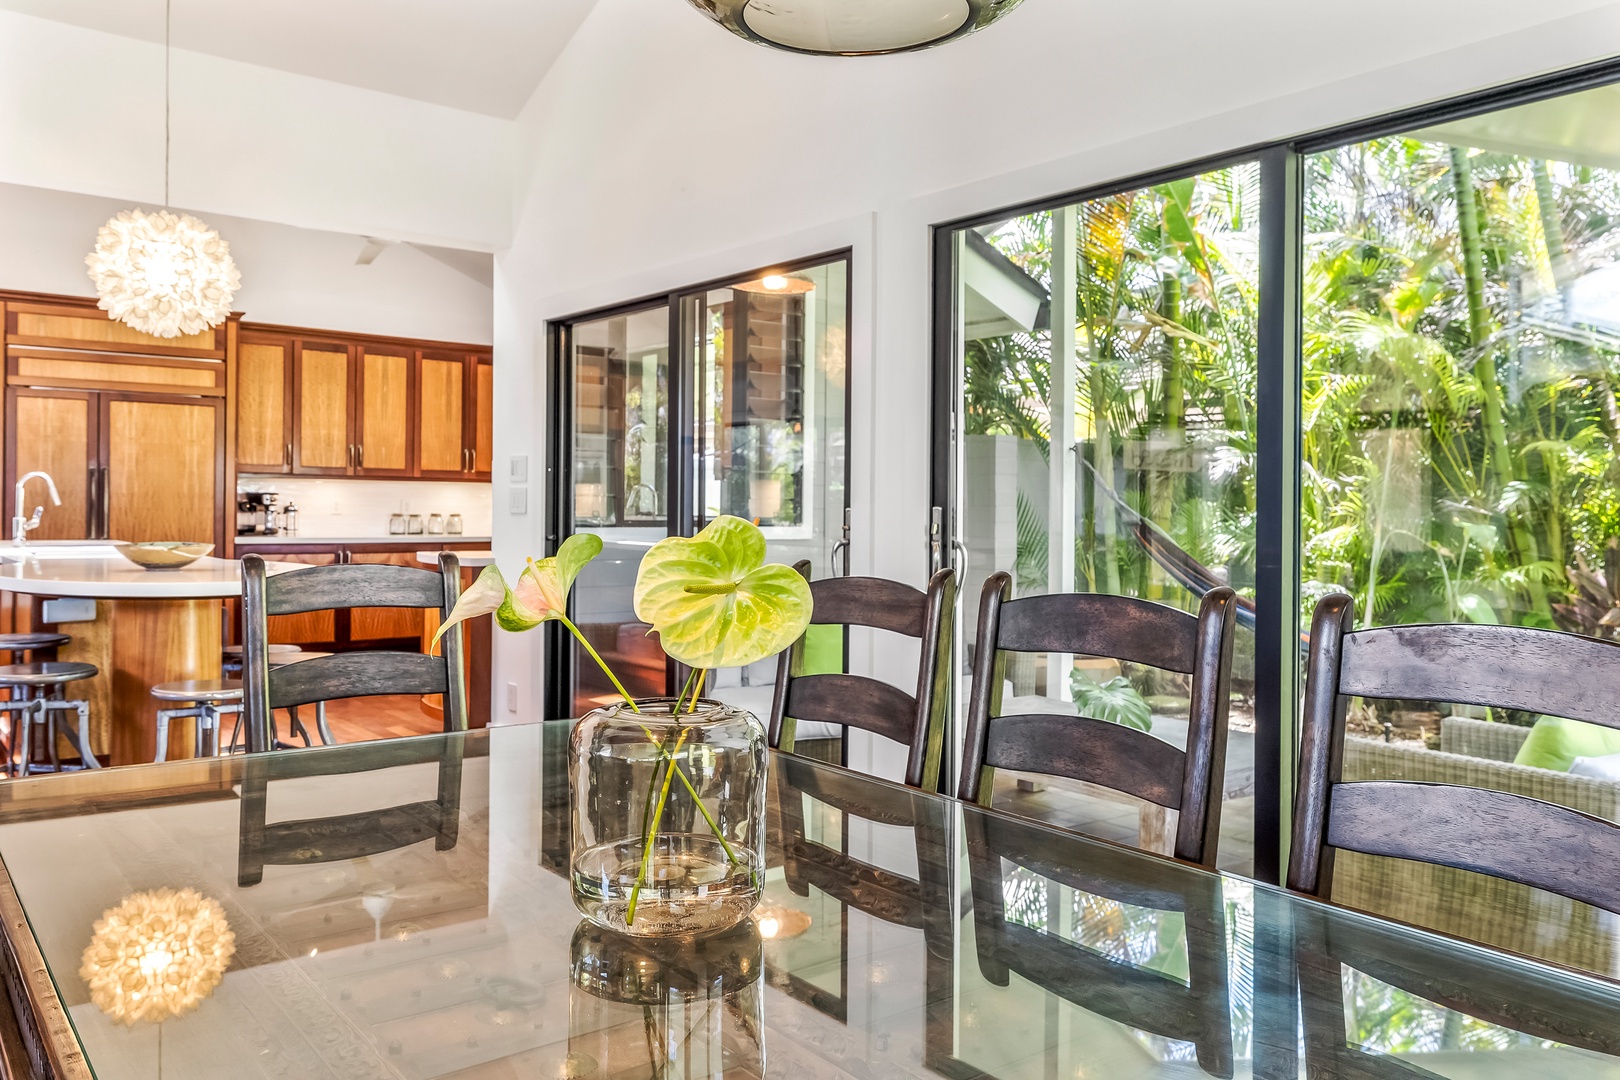 Kailua Vacation Rentals, Hale Ohana - Views of the lush, tropical greenery from the dining area